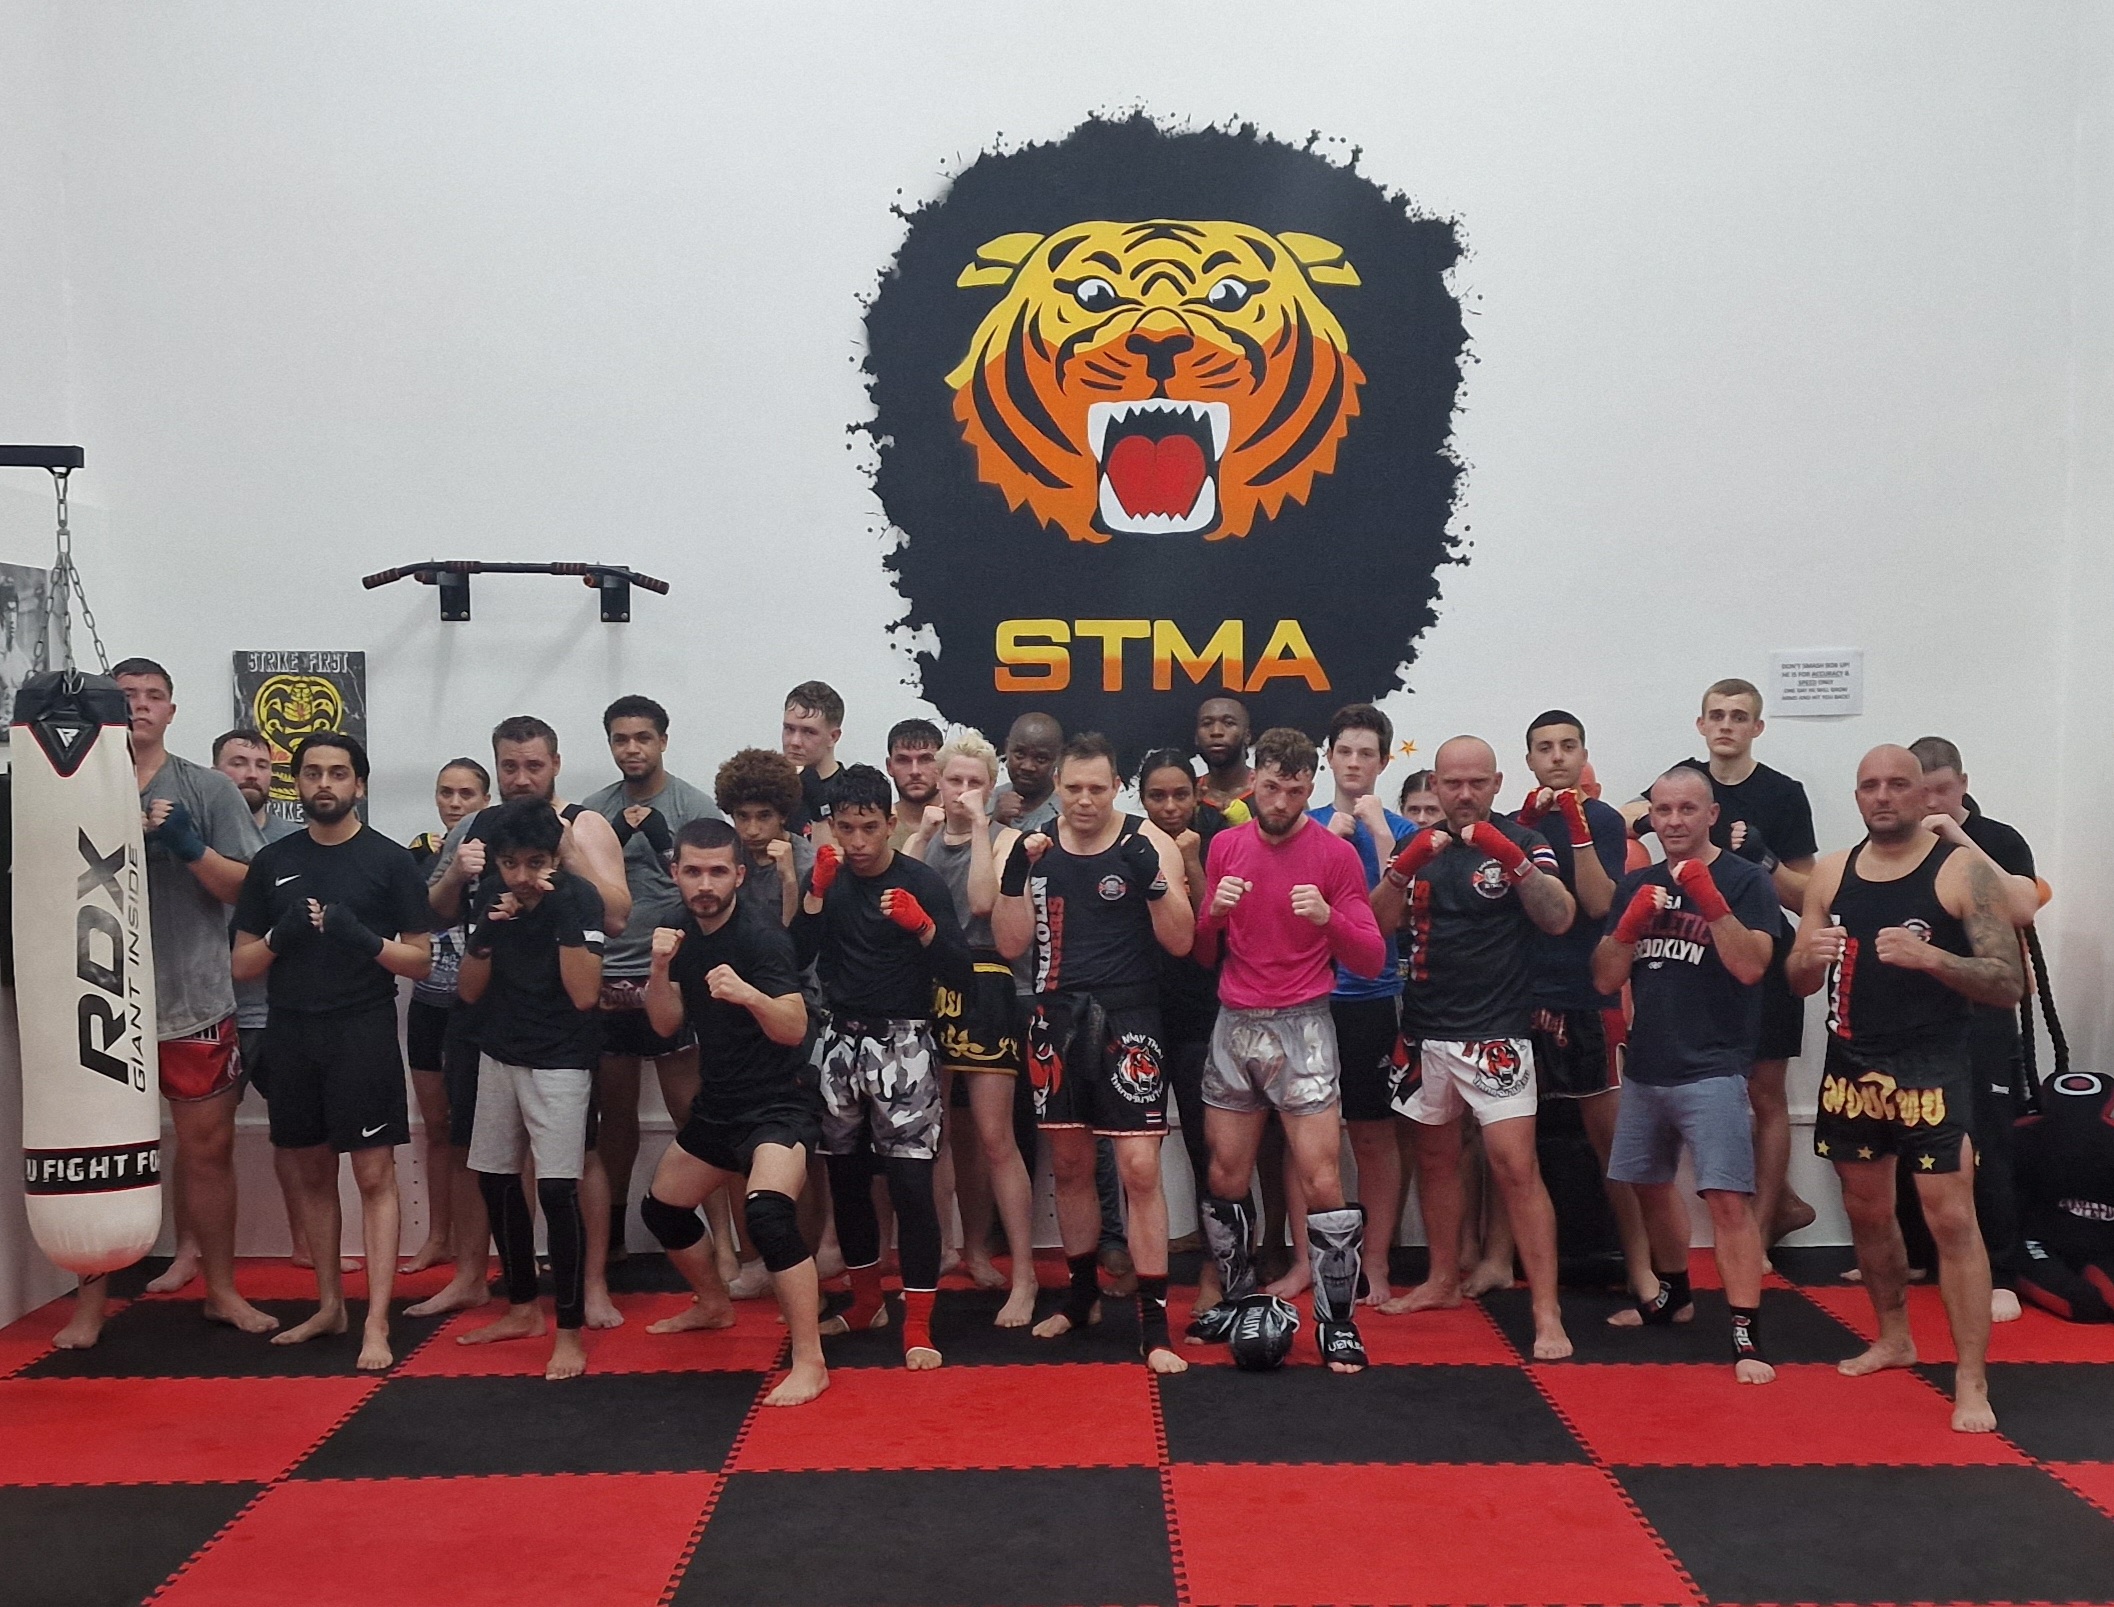 Combat Sports Centre - HQ for the International Kickboxing Academy,  Gilmores Boxing Club and MMA fight team.